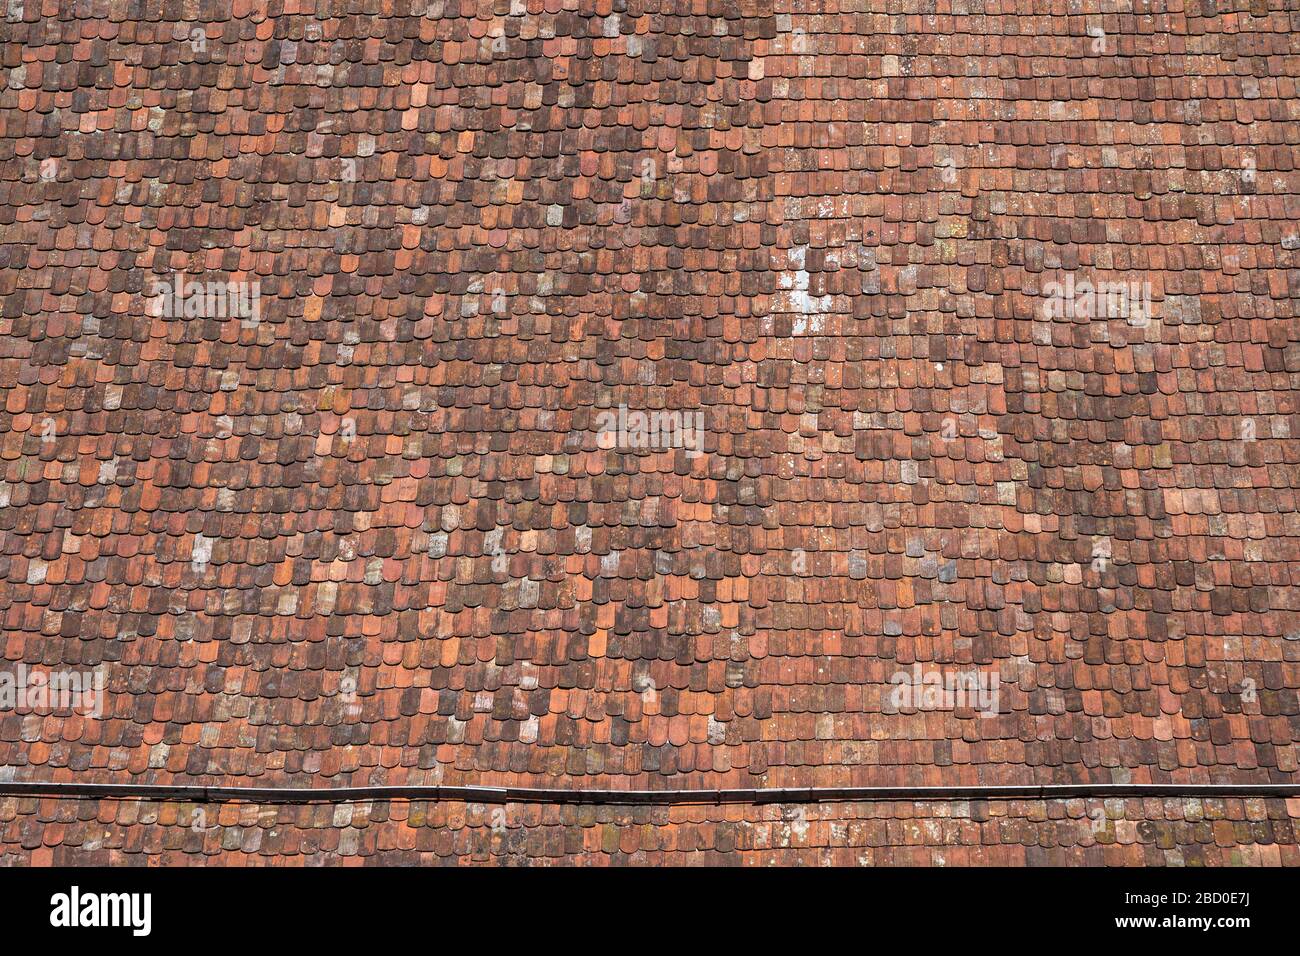 Large roof with very old roof tiles Stock Photo